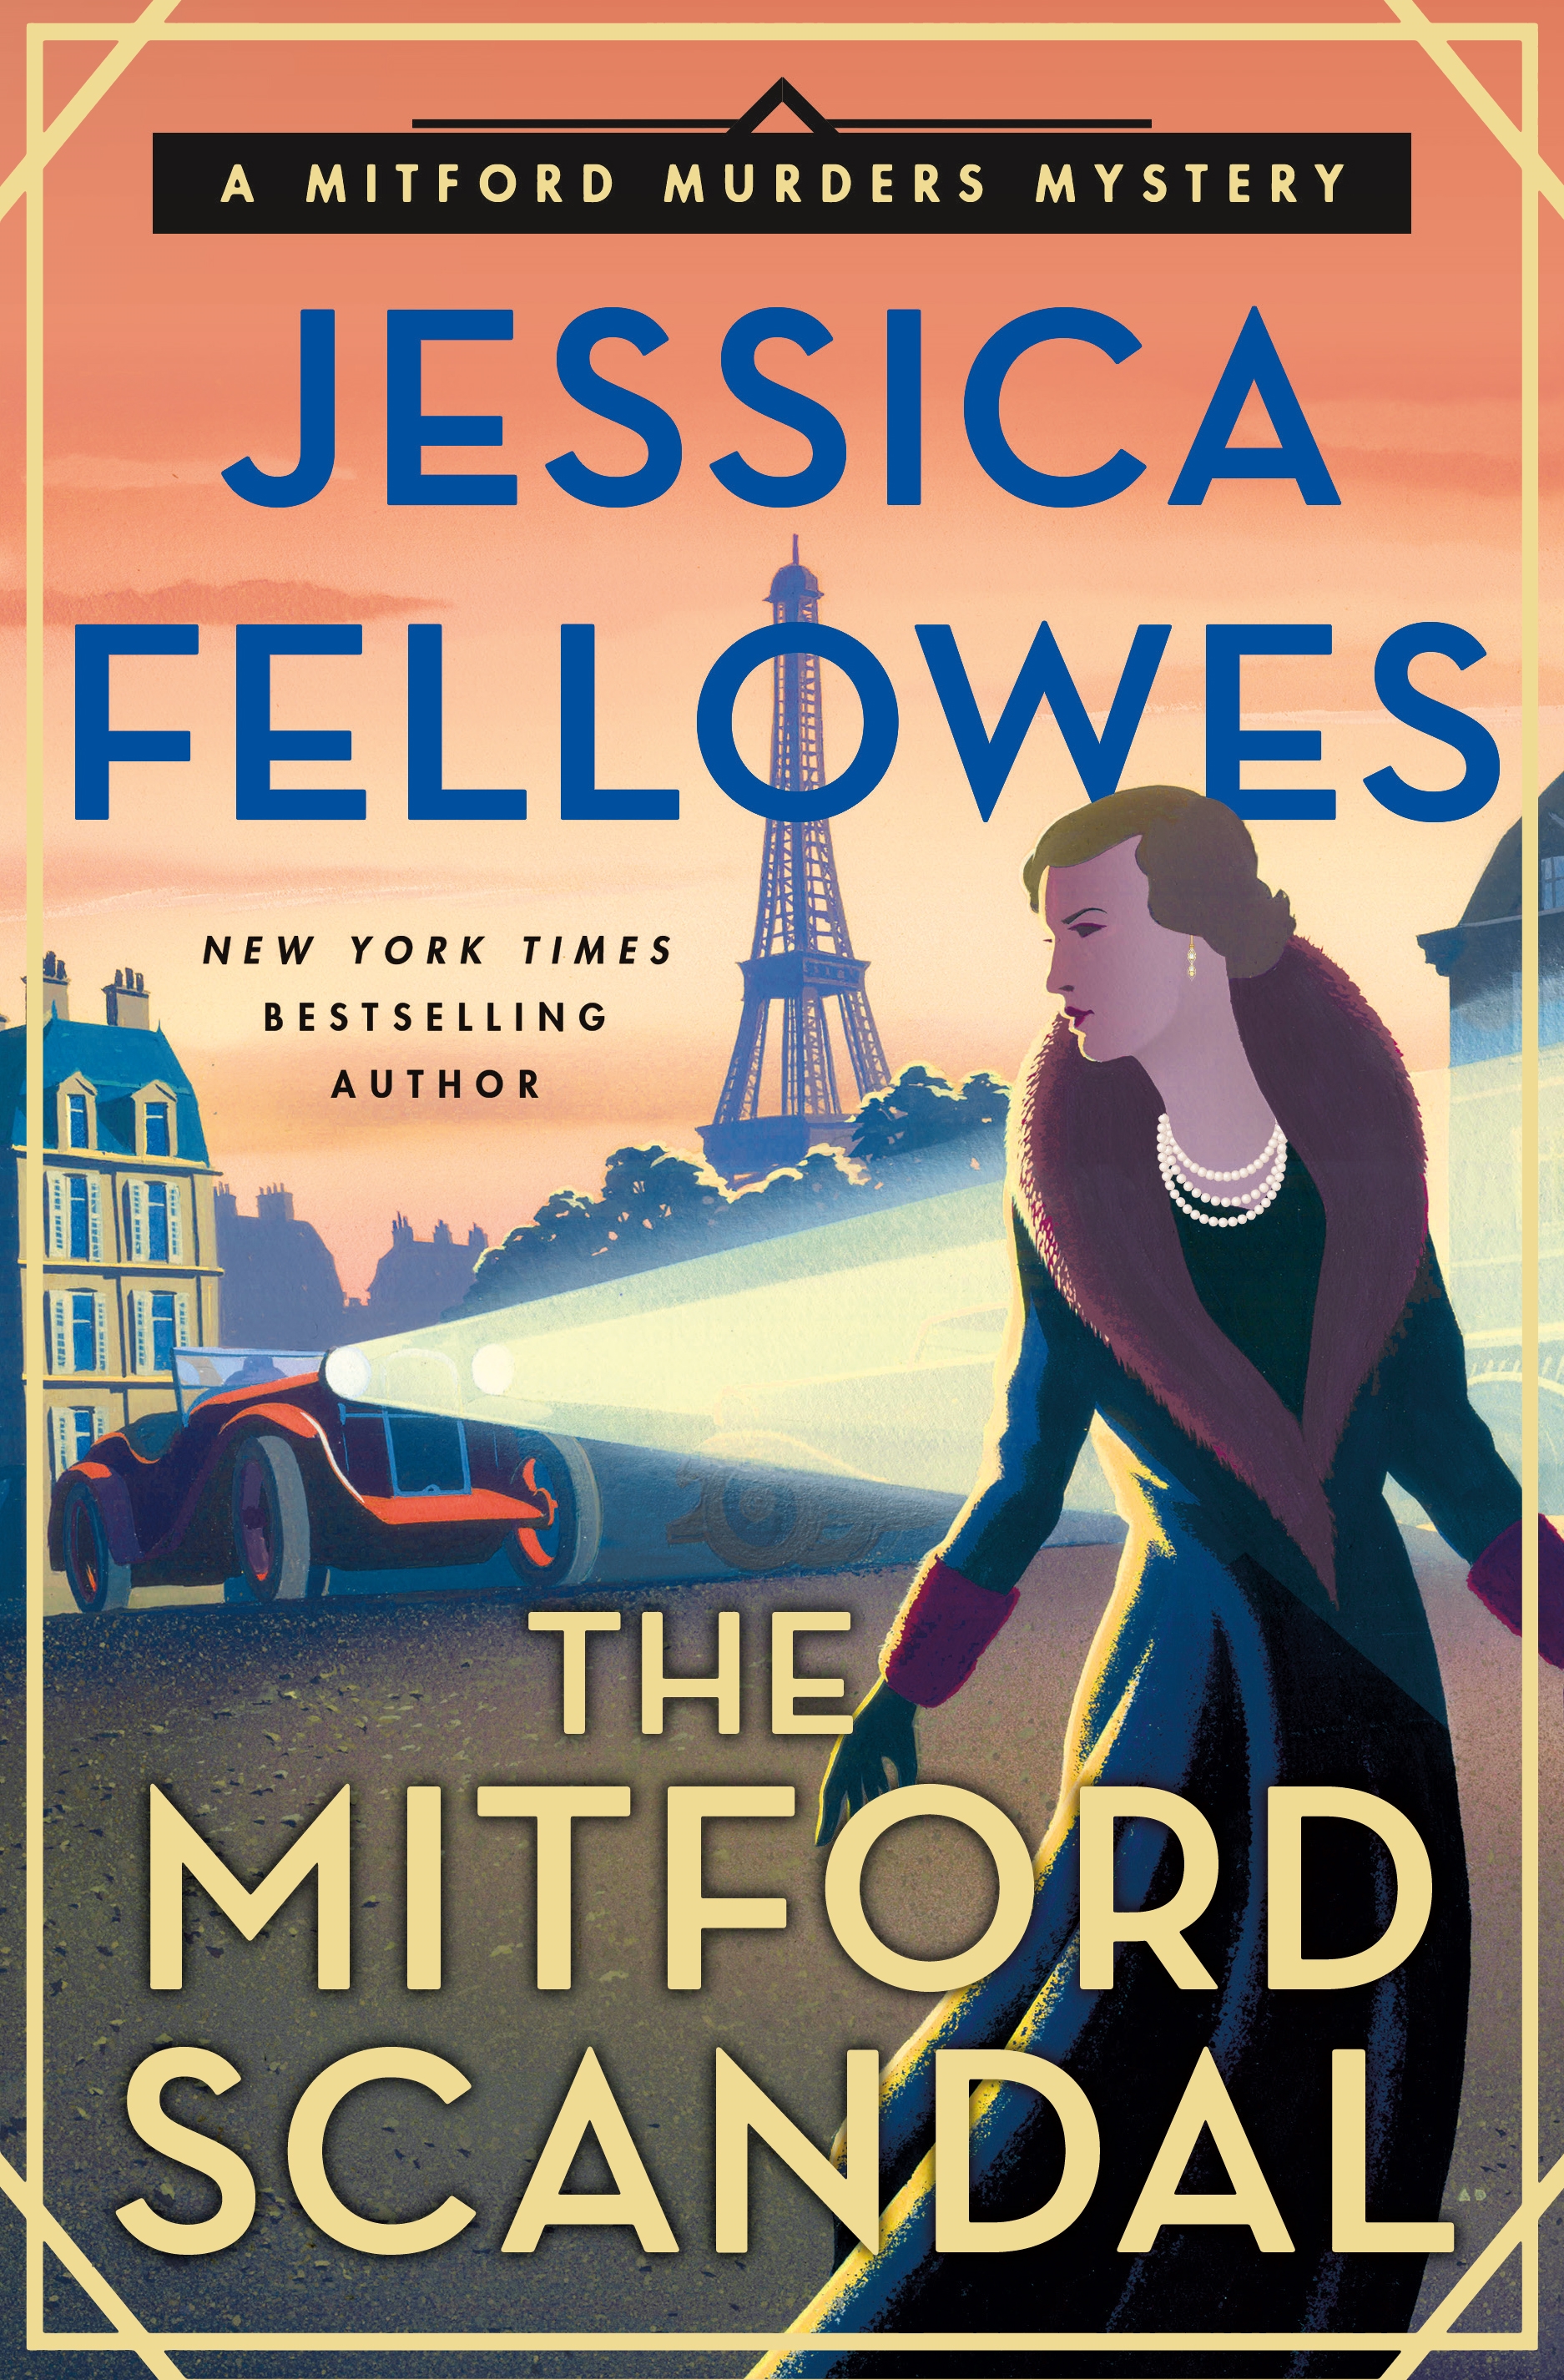 The Mitford scandal cover image